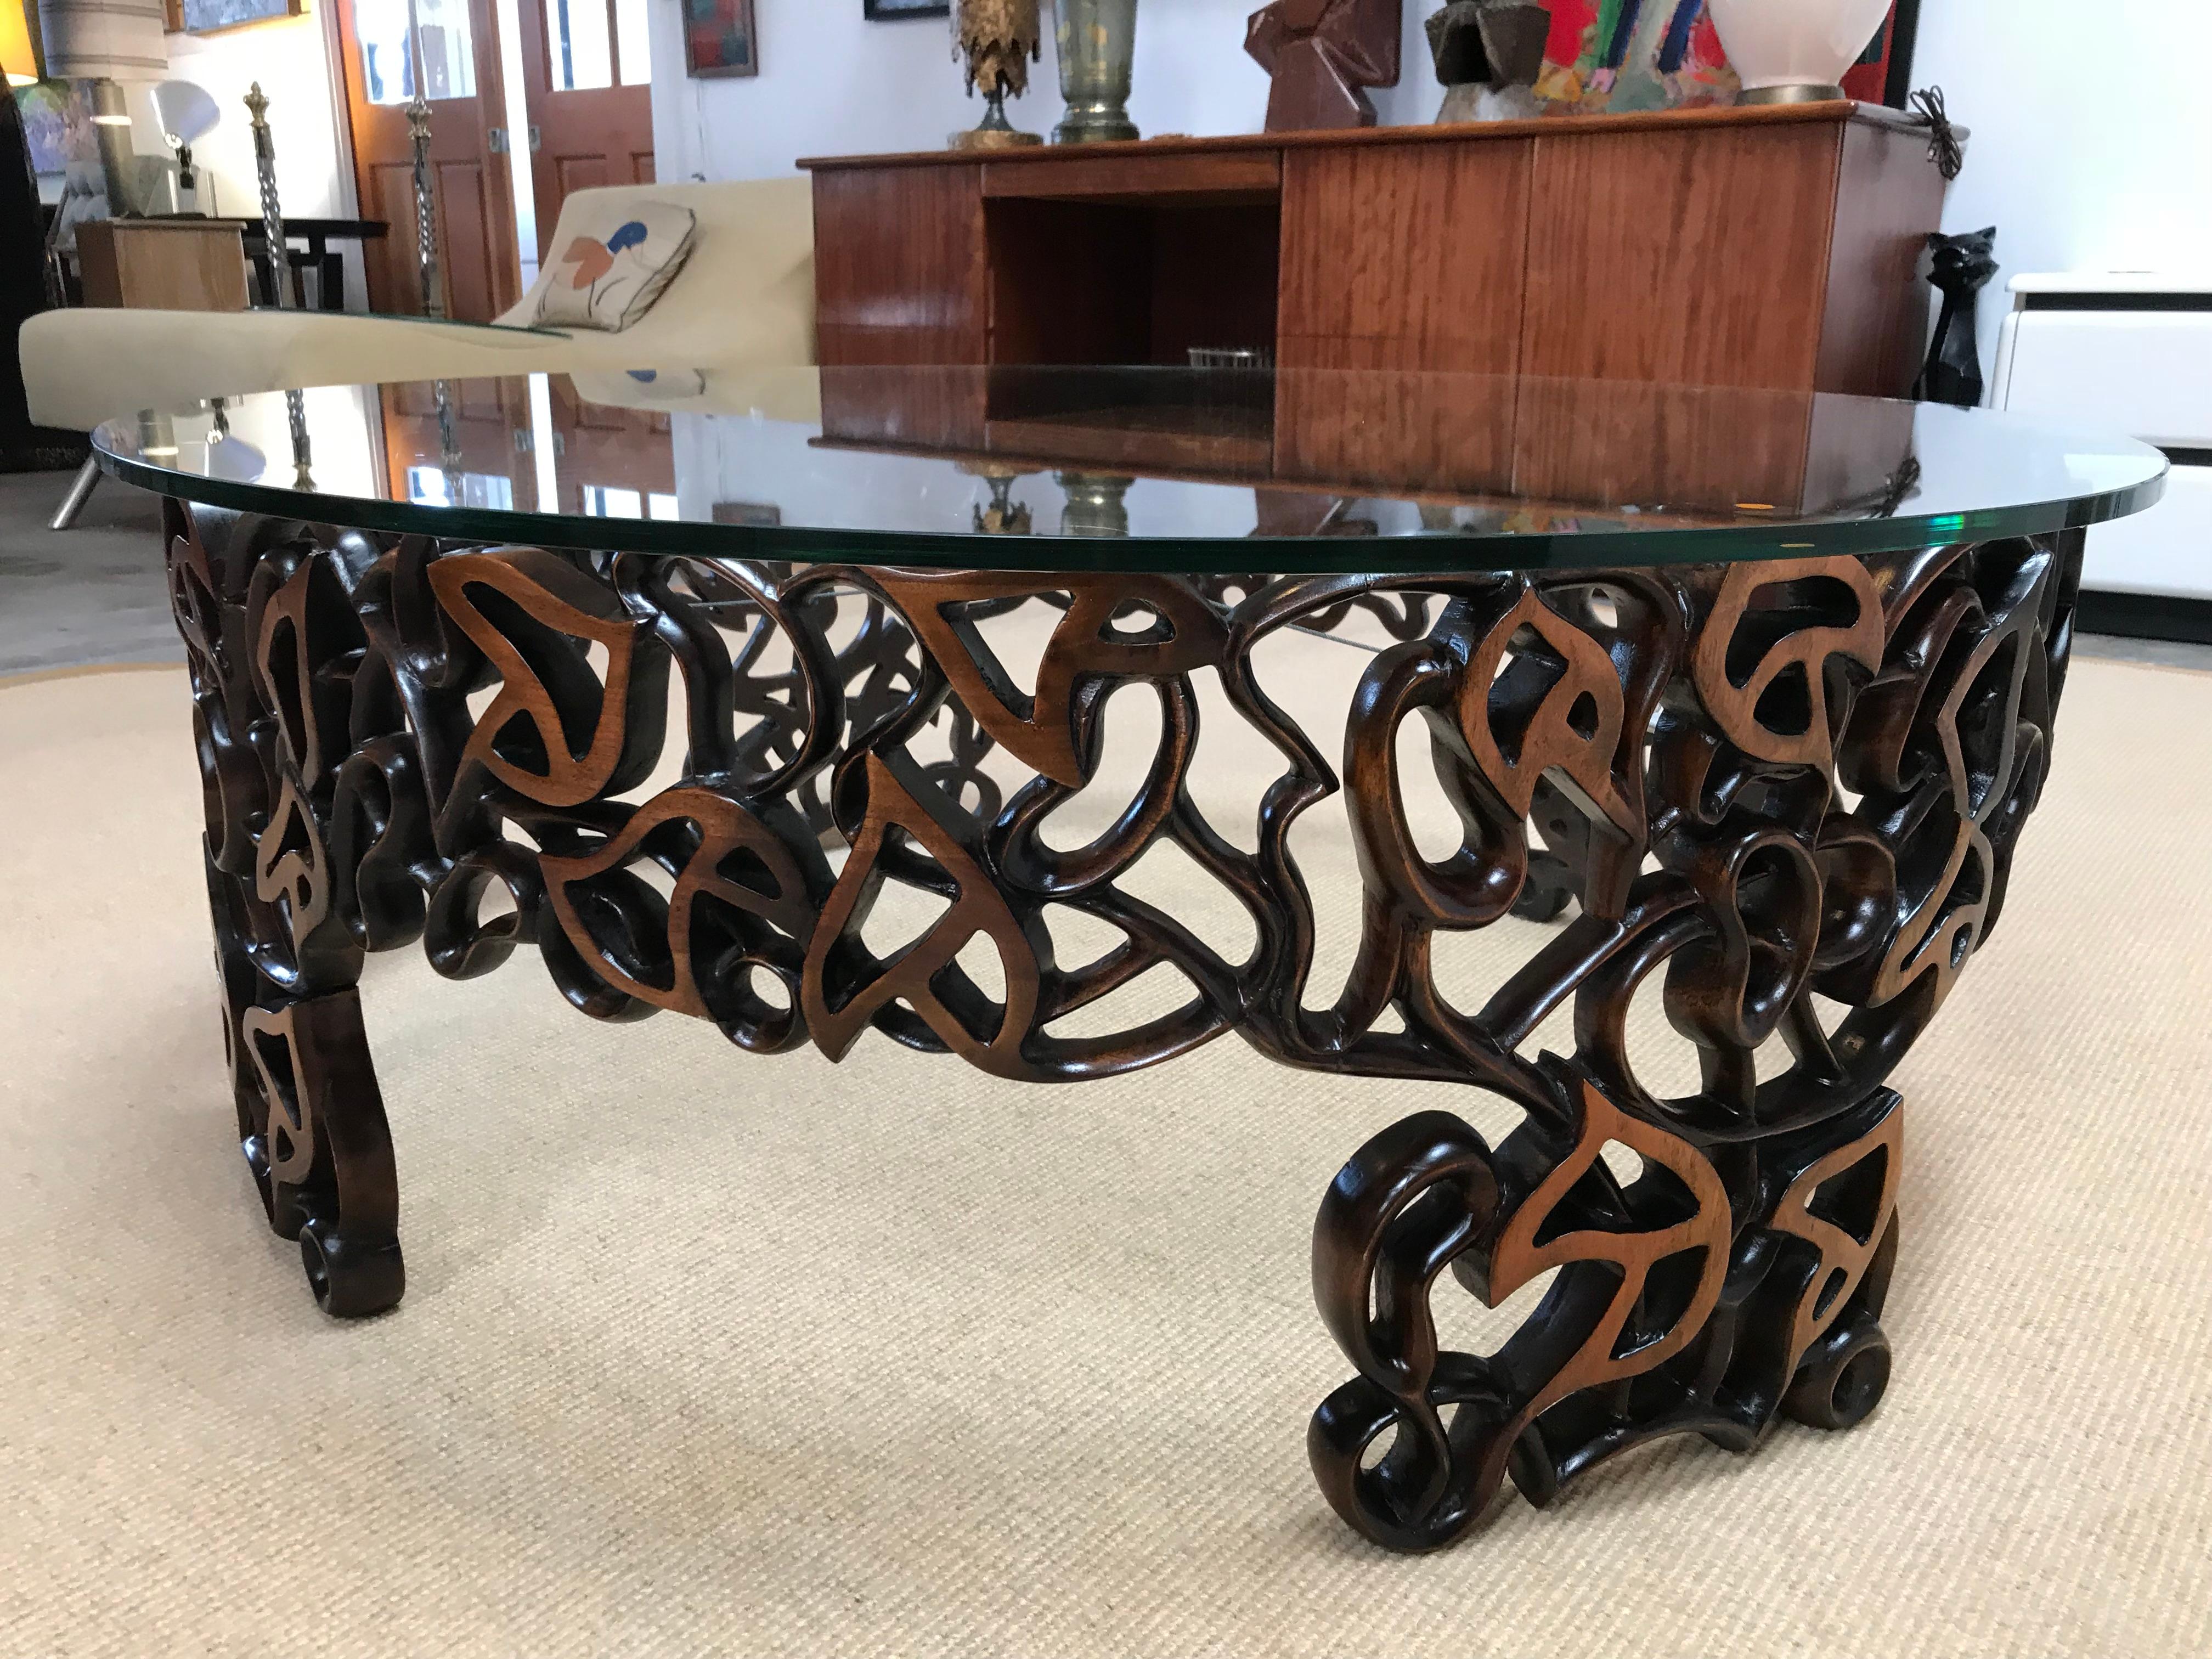 Unique hand-carved walnut coffee table by artist Doug Edge. The intricate design resembles delicate lace. Four legs and glass top.
A steel cable stabilizes it. This work took a year to be achieved! It is a perfect example of workmanship.
Doug Edge